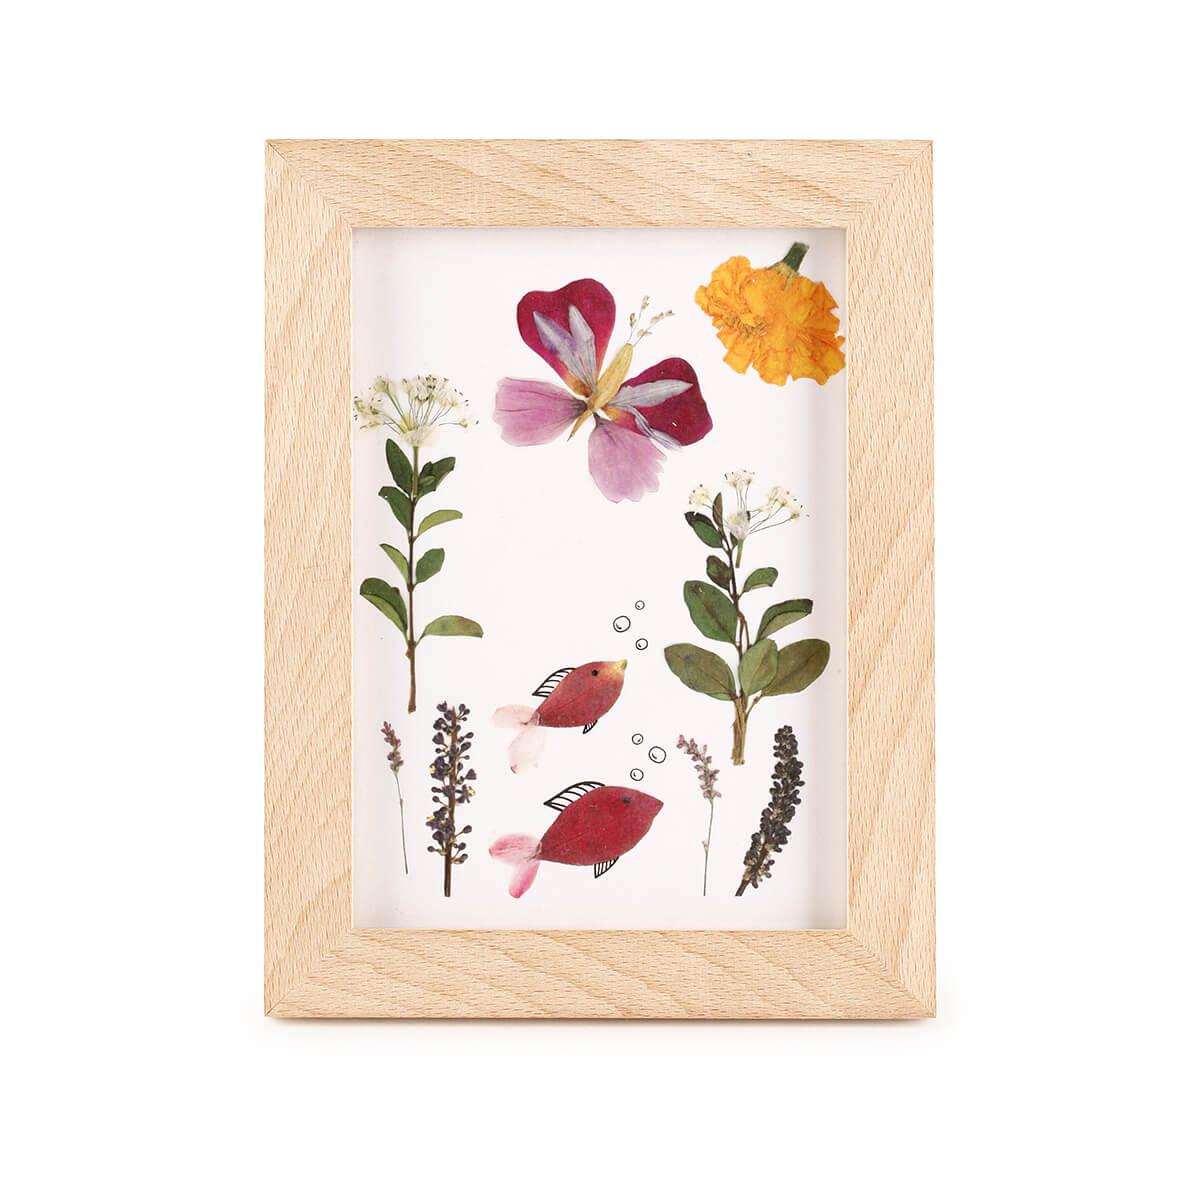 Create Your Own Pressed Flower Art - Craft Kits - Art + Craft - Adults -  Hinkler